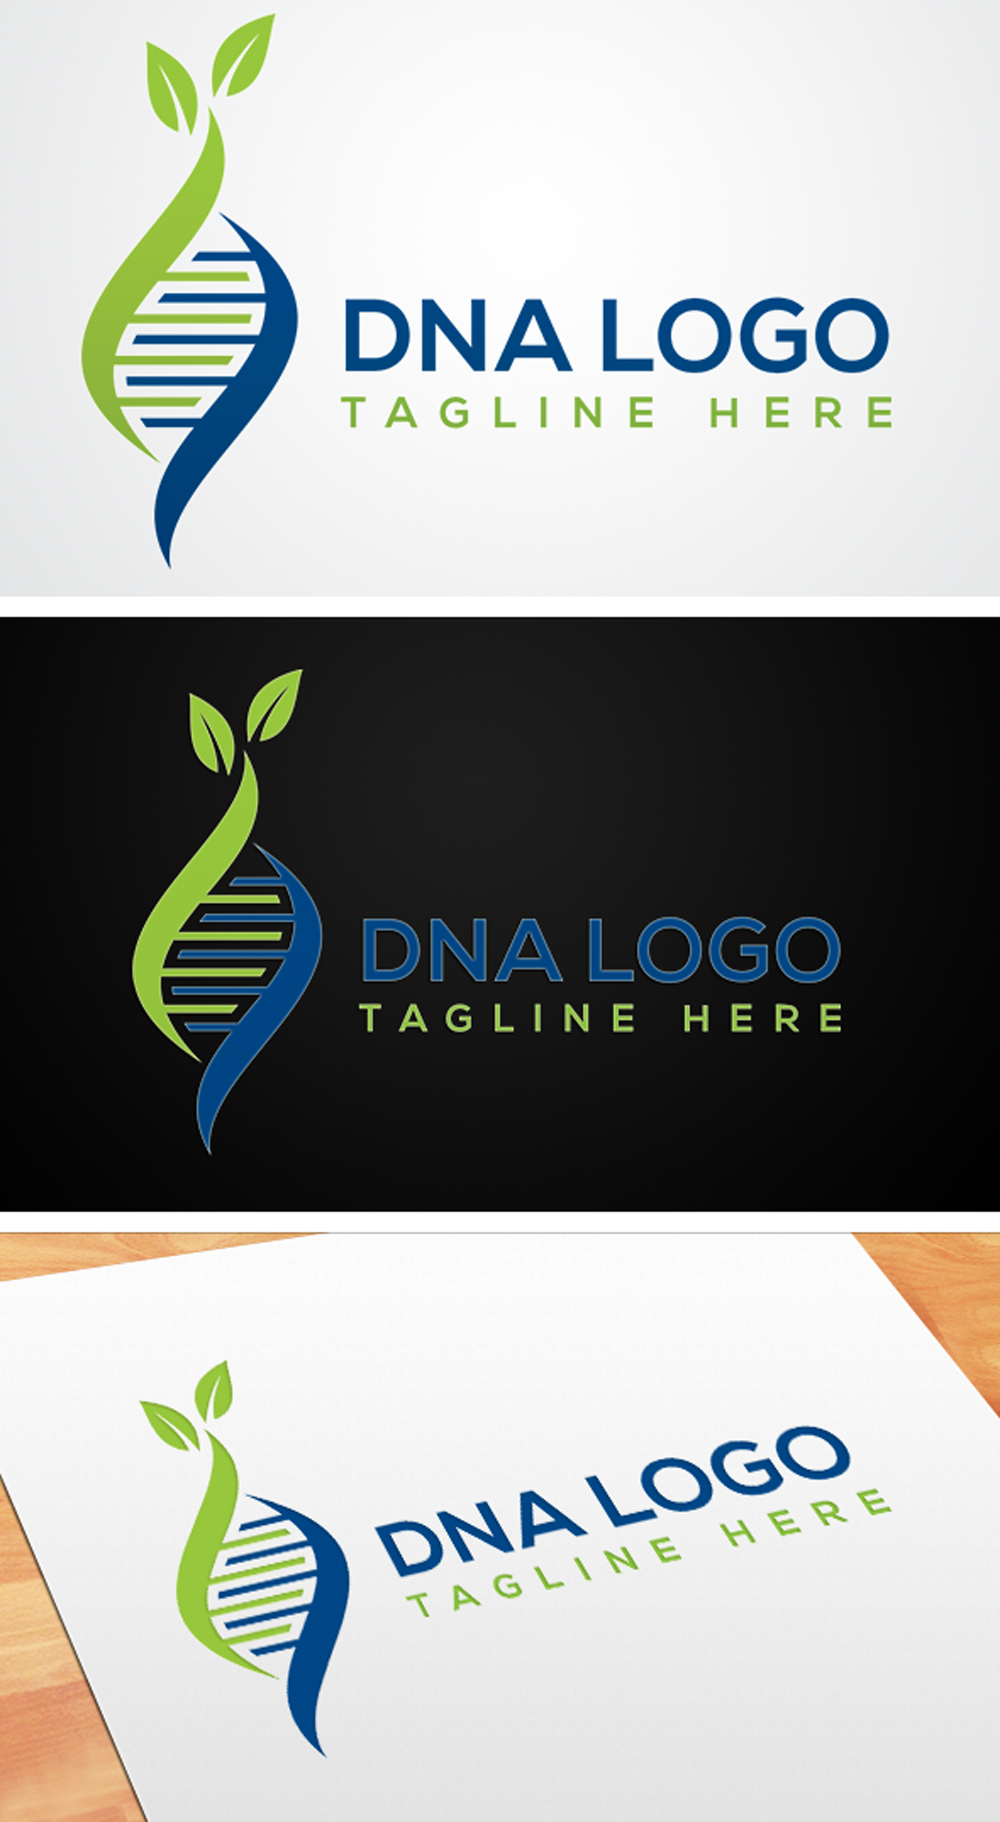 Collection of images of adorable DNA shape logos.